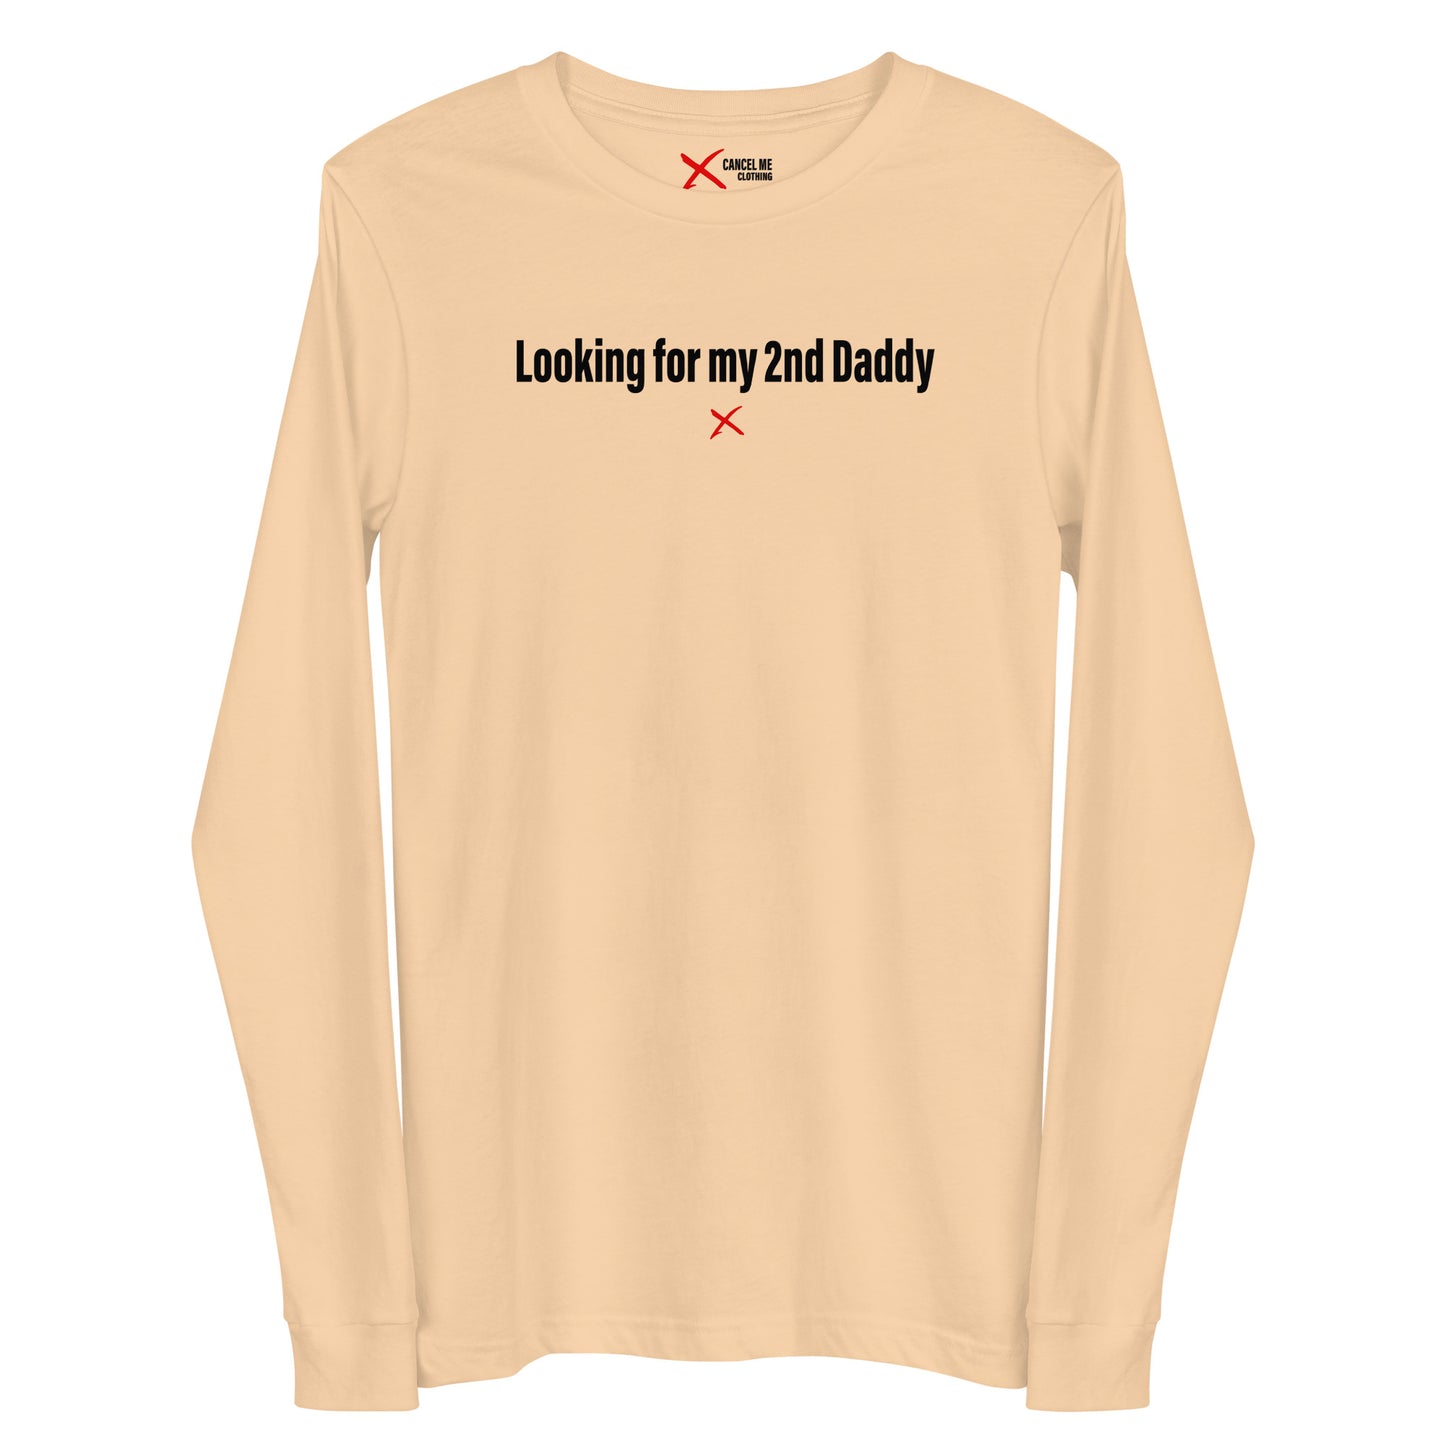 Looking for my 2nd Daddy - Longsleeve